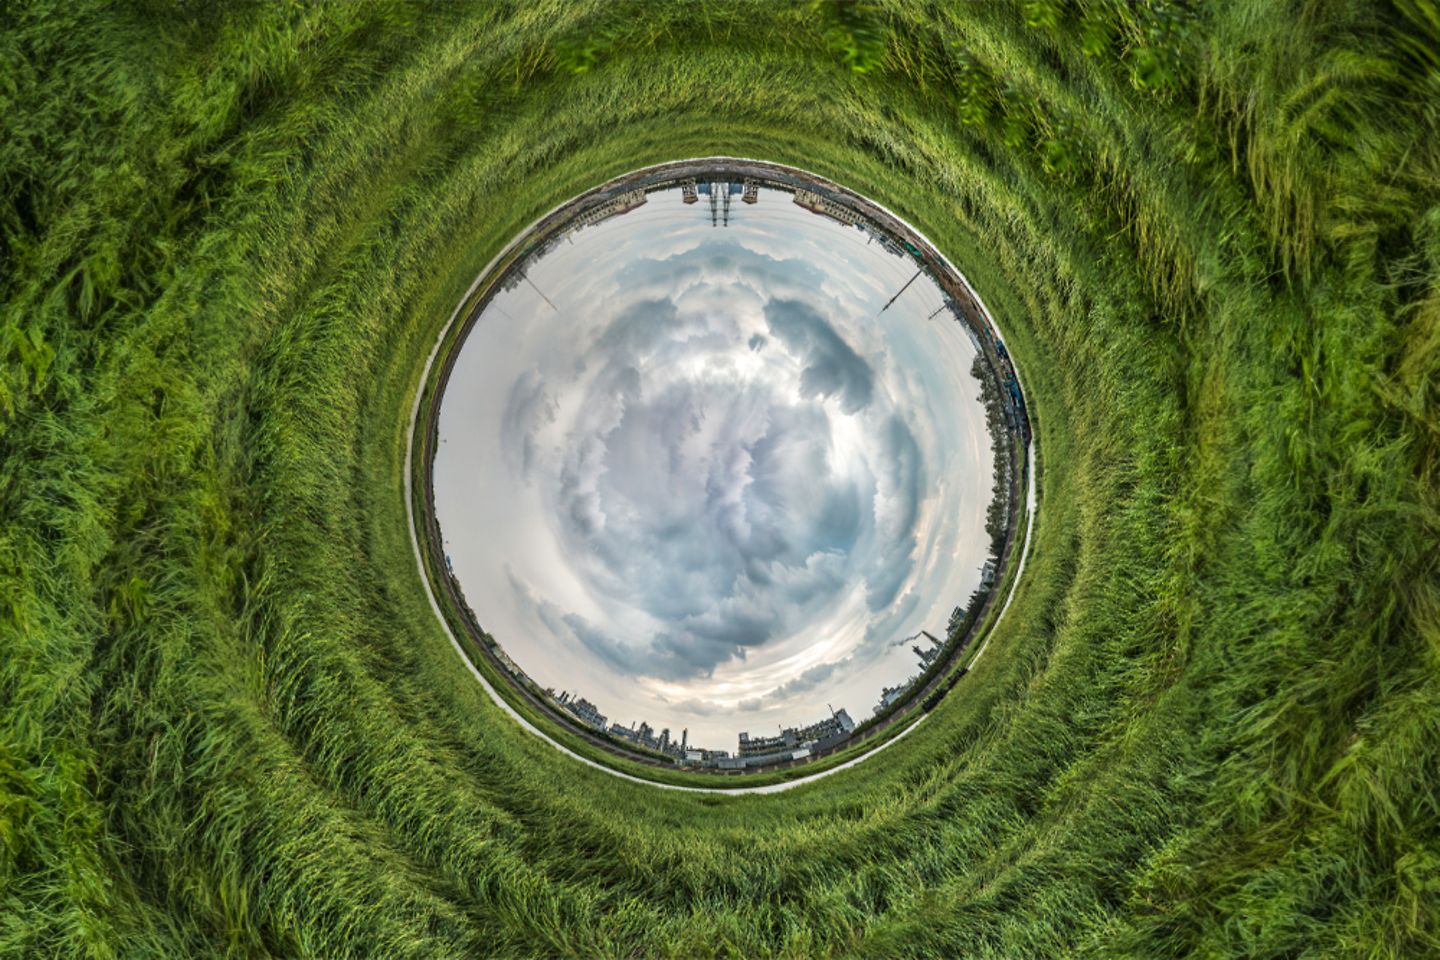 Fish eye perspective on grass and industrial area